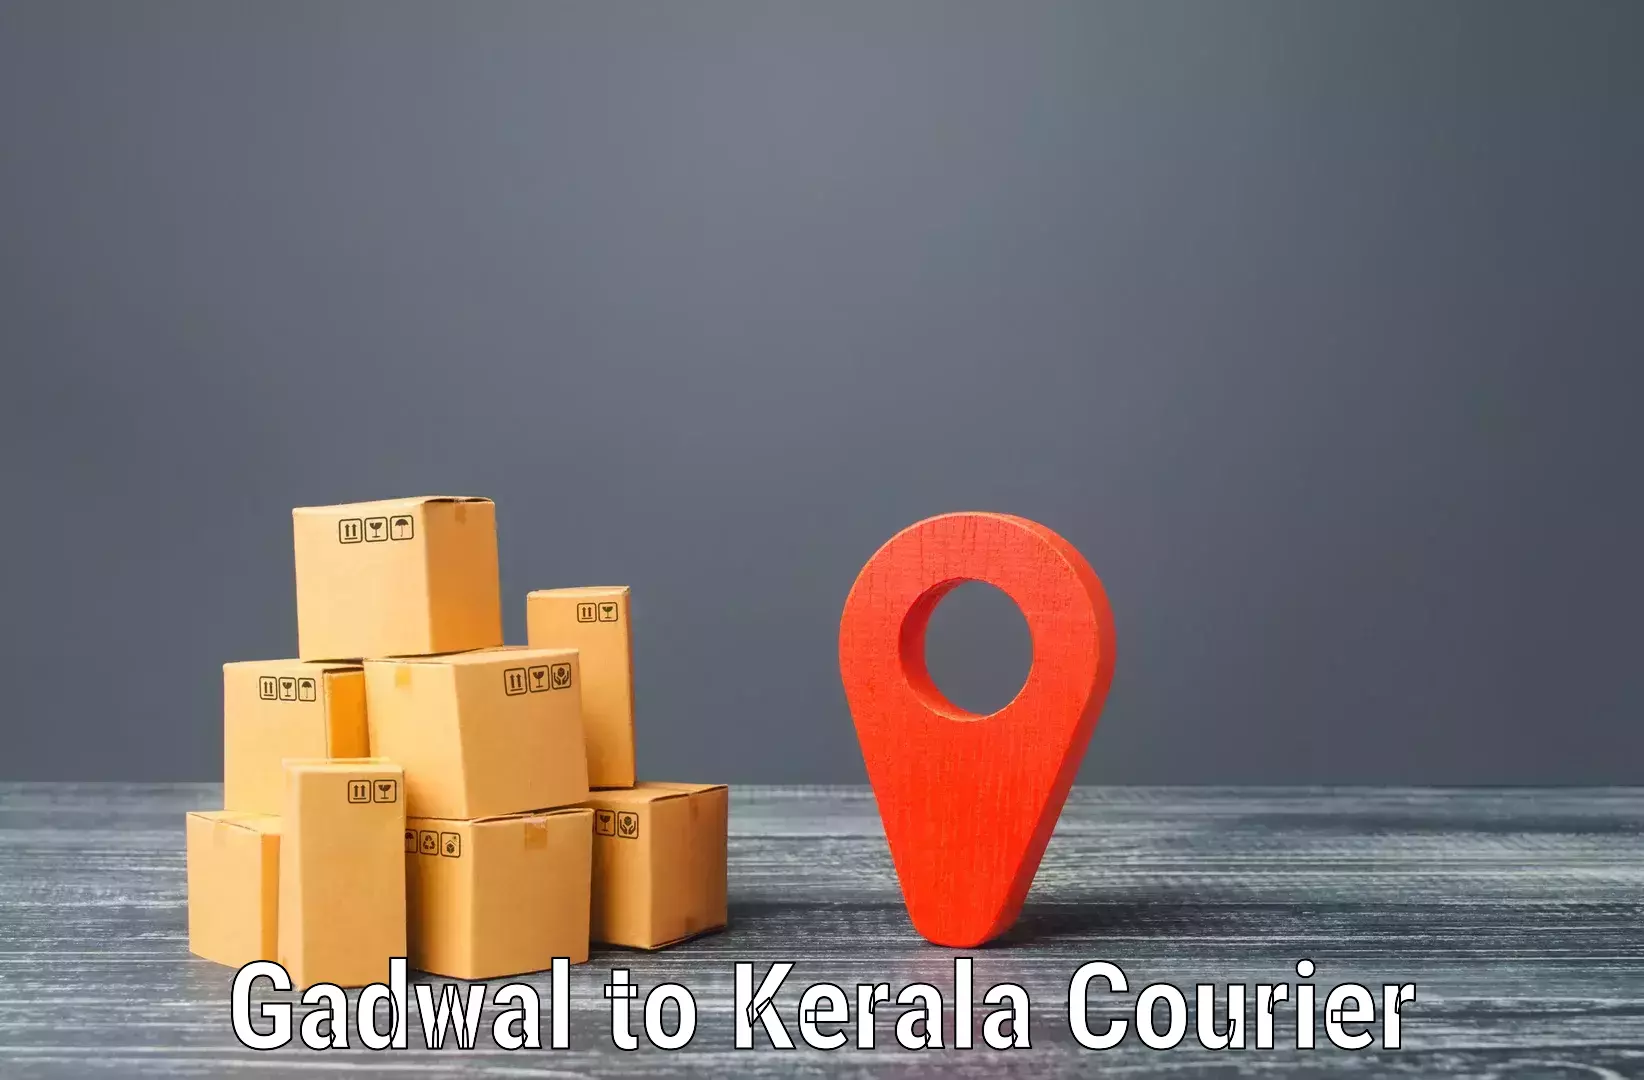 Express package services Gadwal to Palai